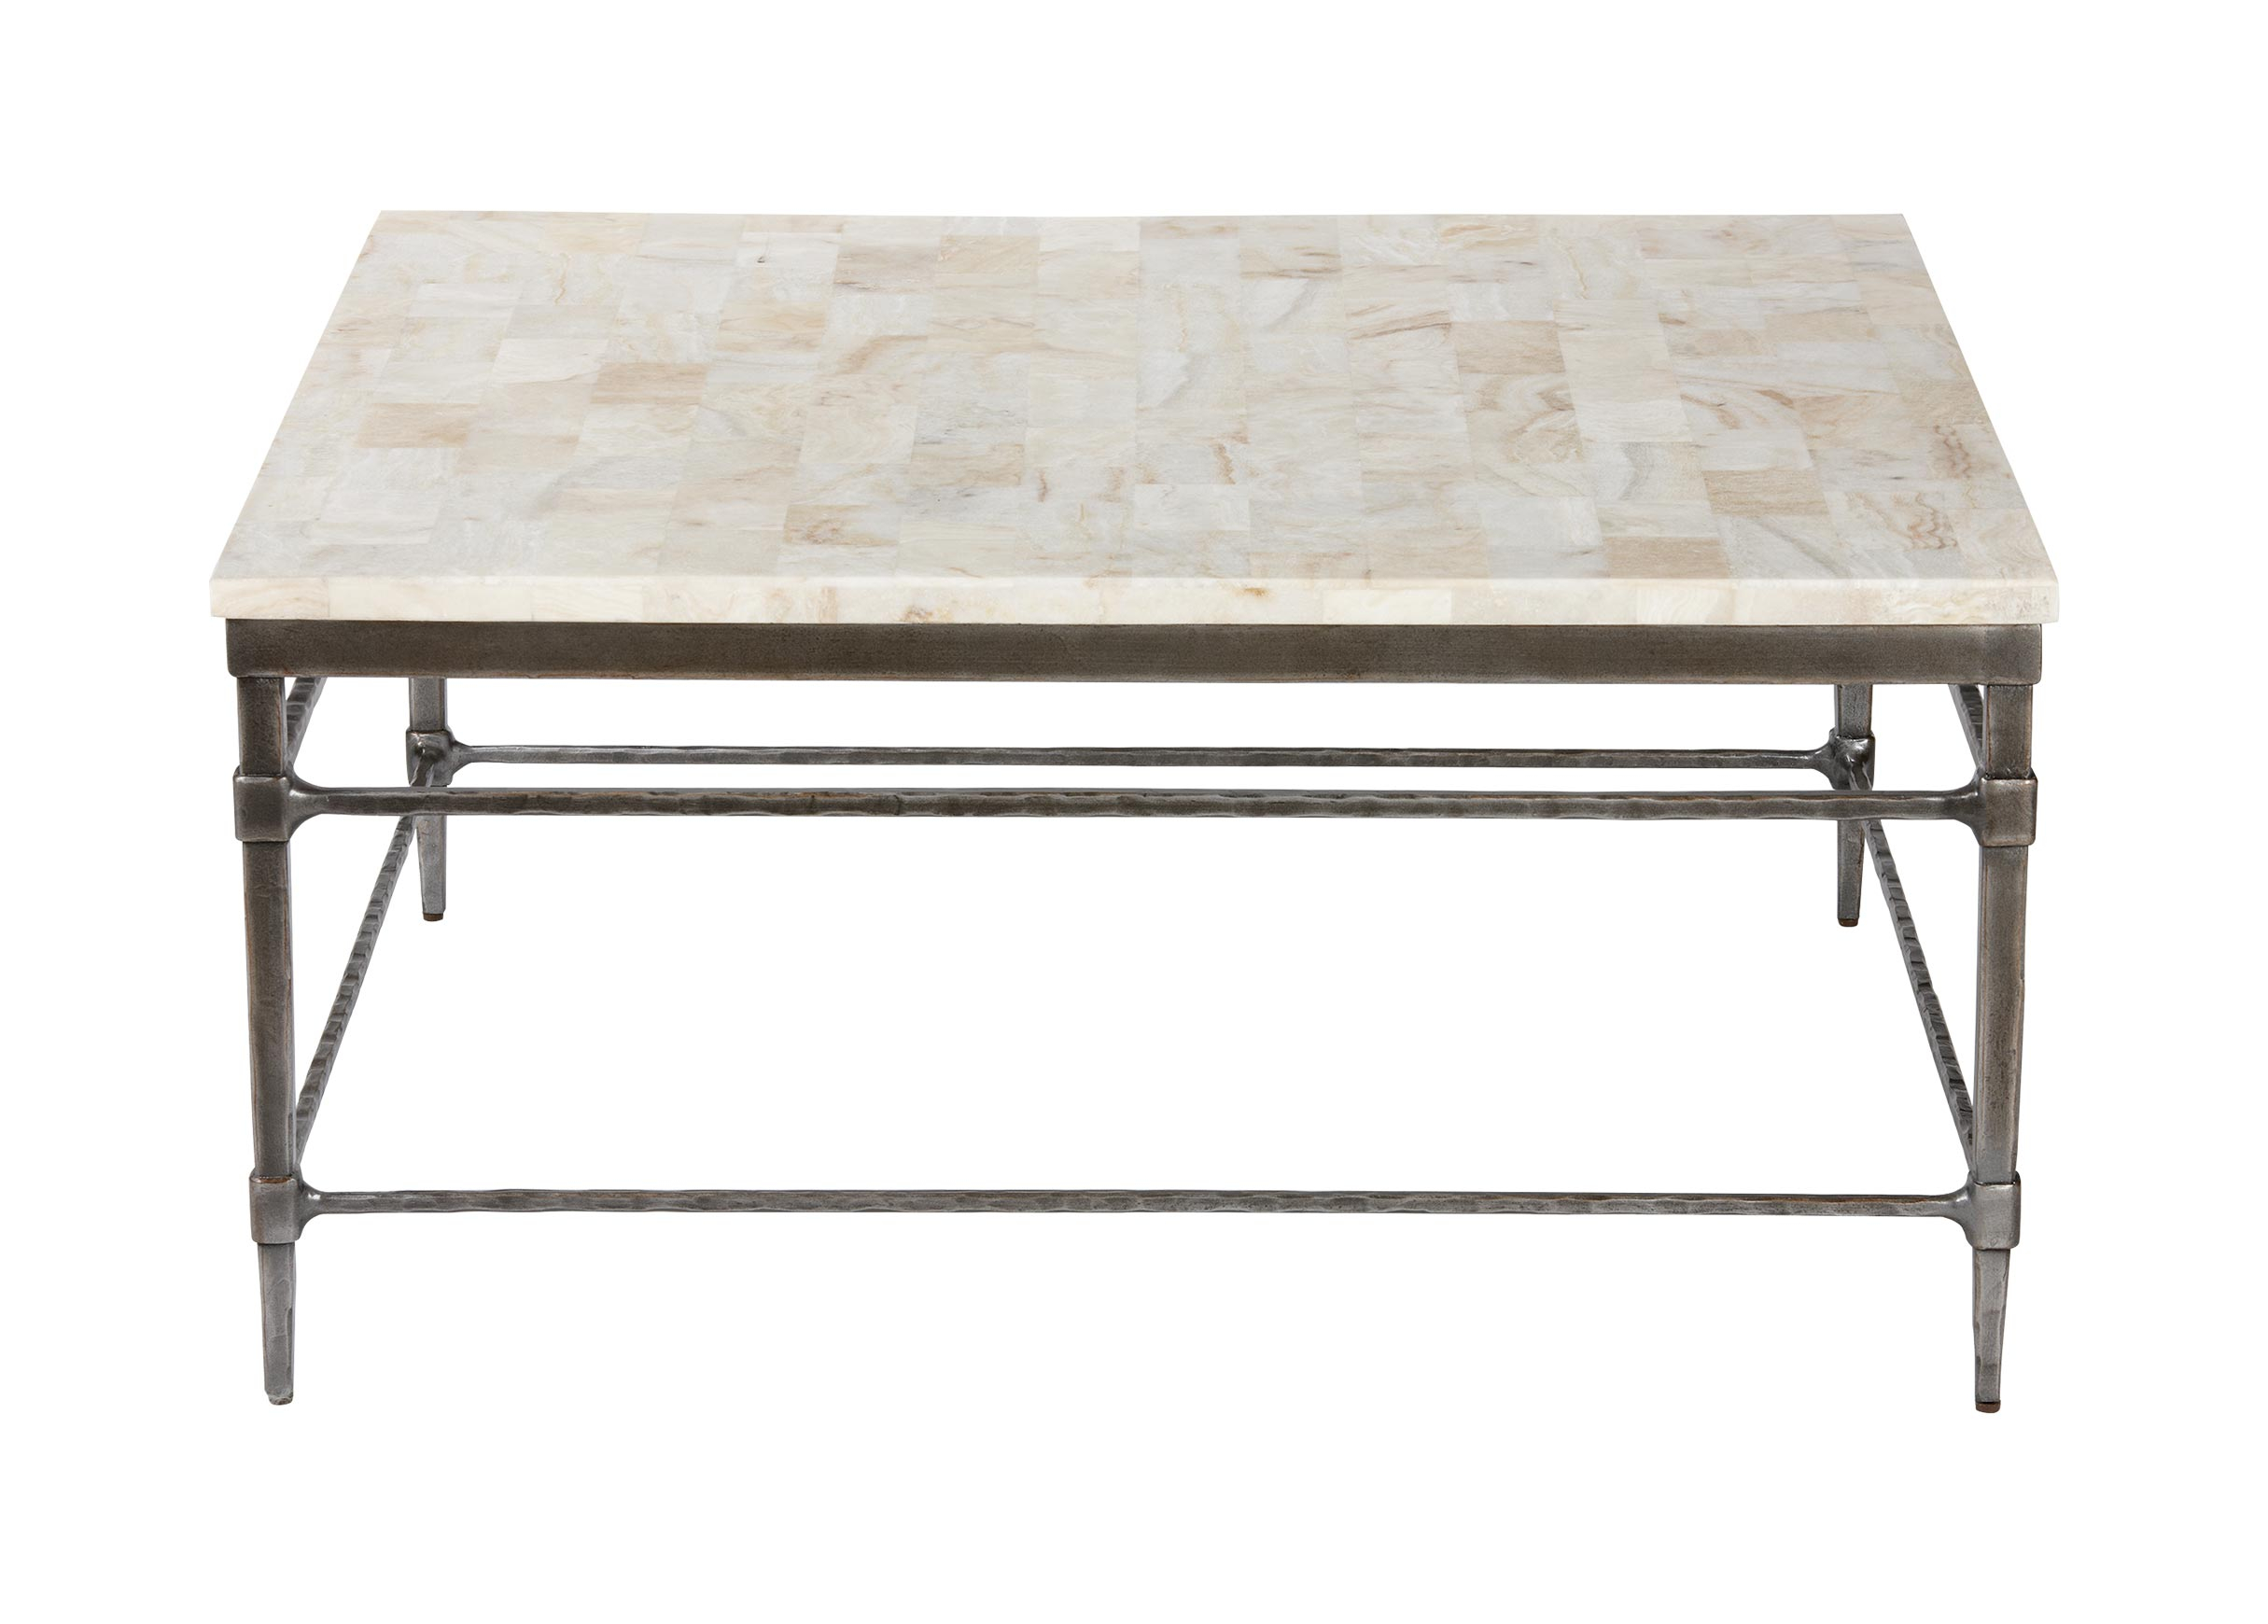 Vida Square Stone Top Coffee Table Coffee Tables Ethan Allen with regard to dimensions 2430 X 1740